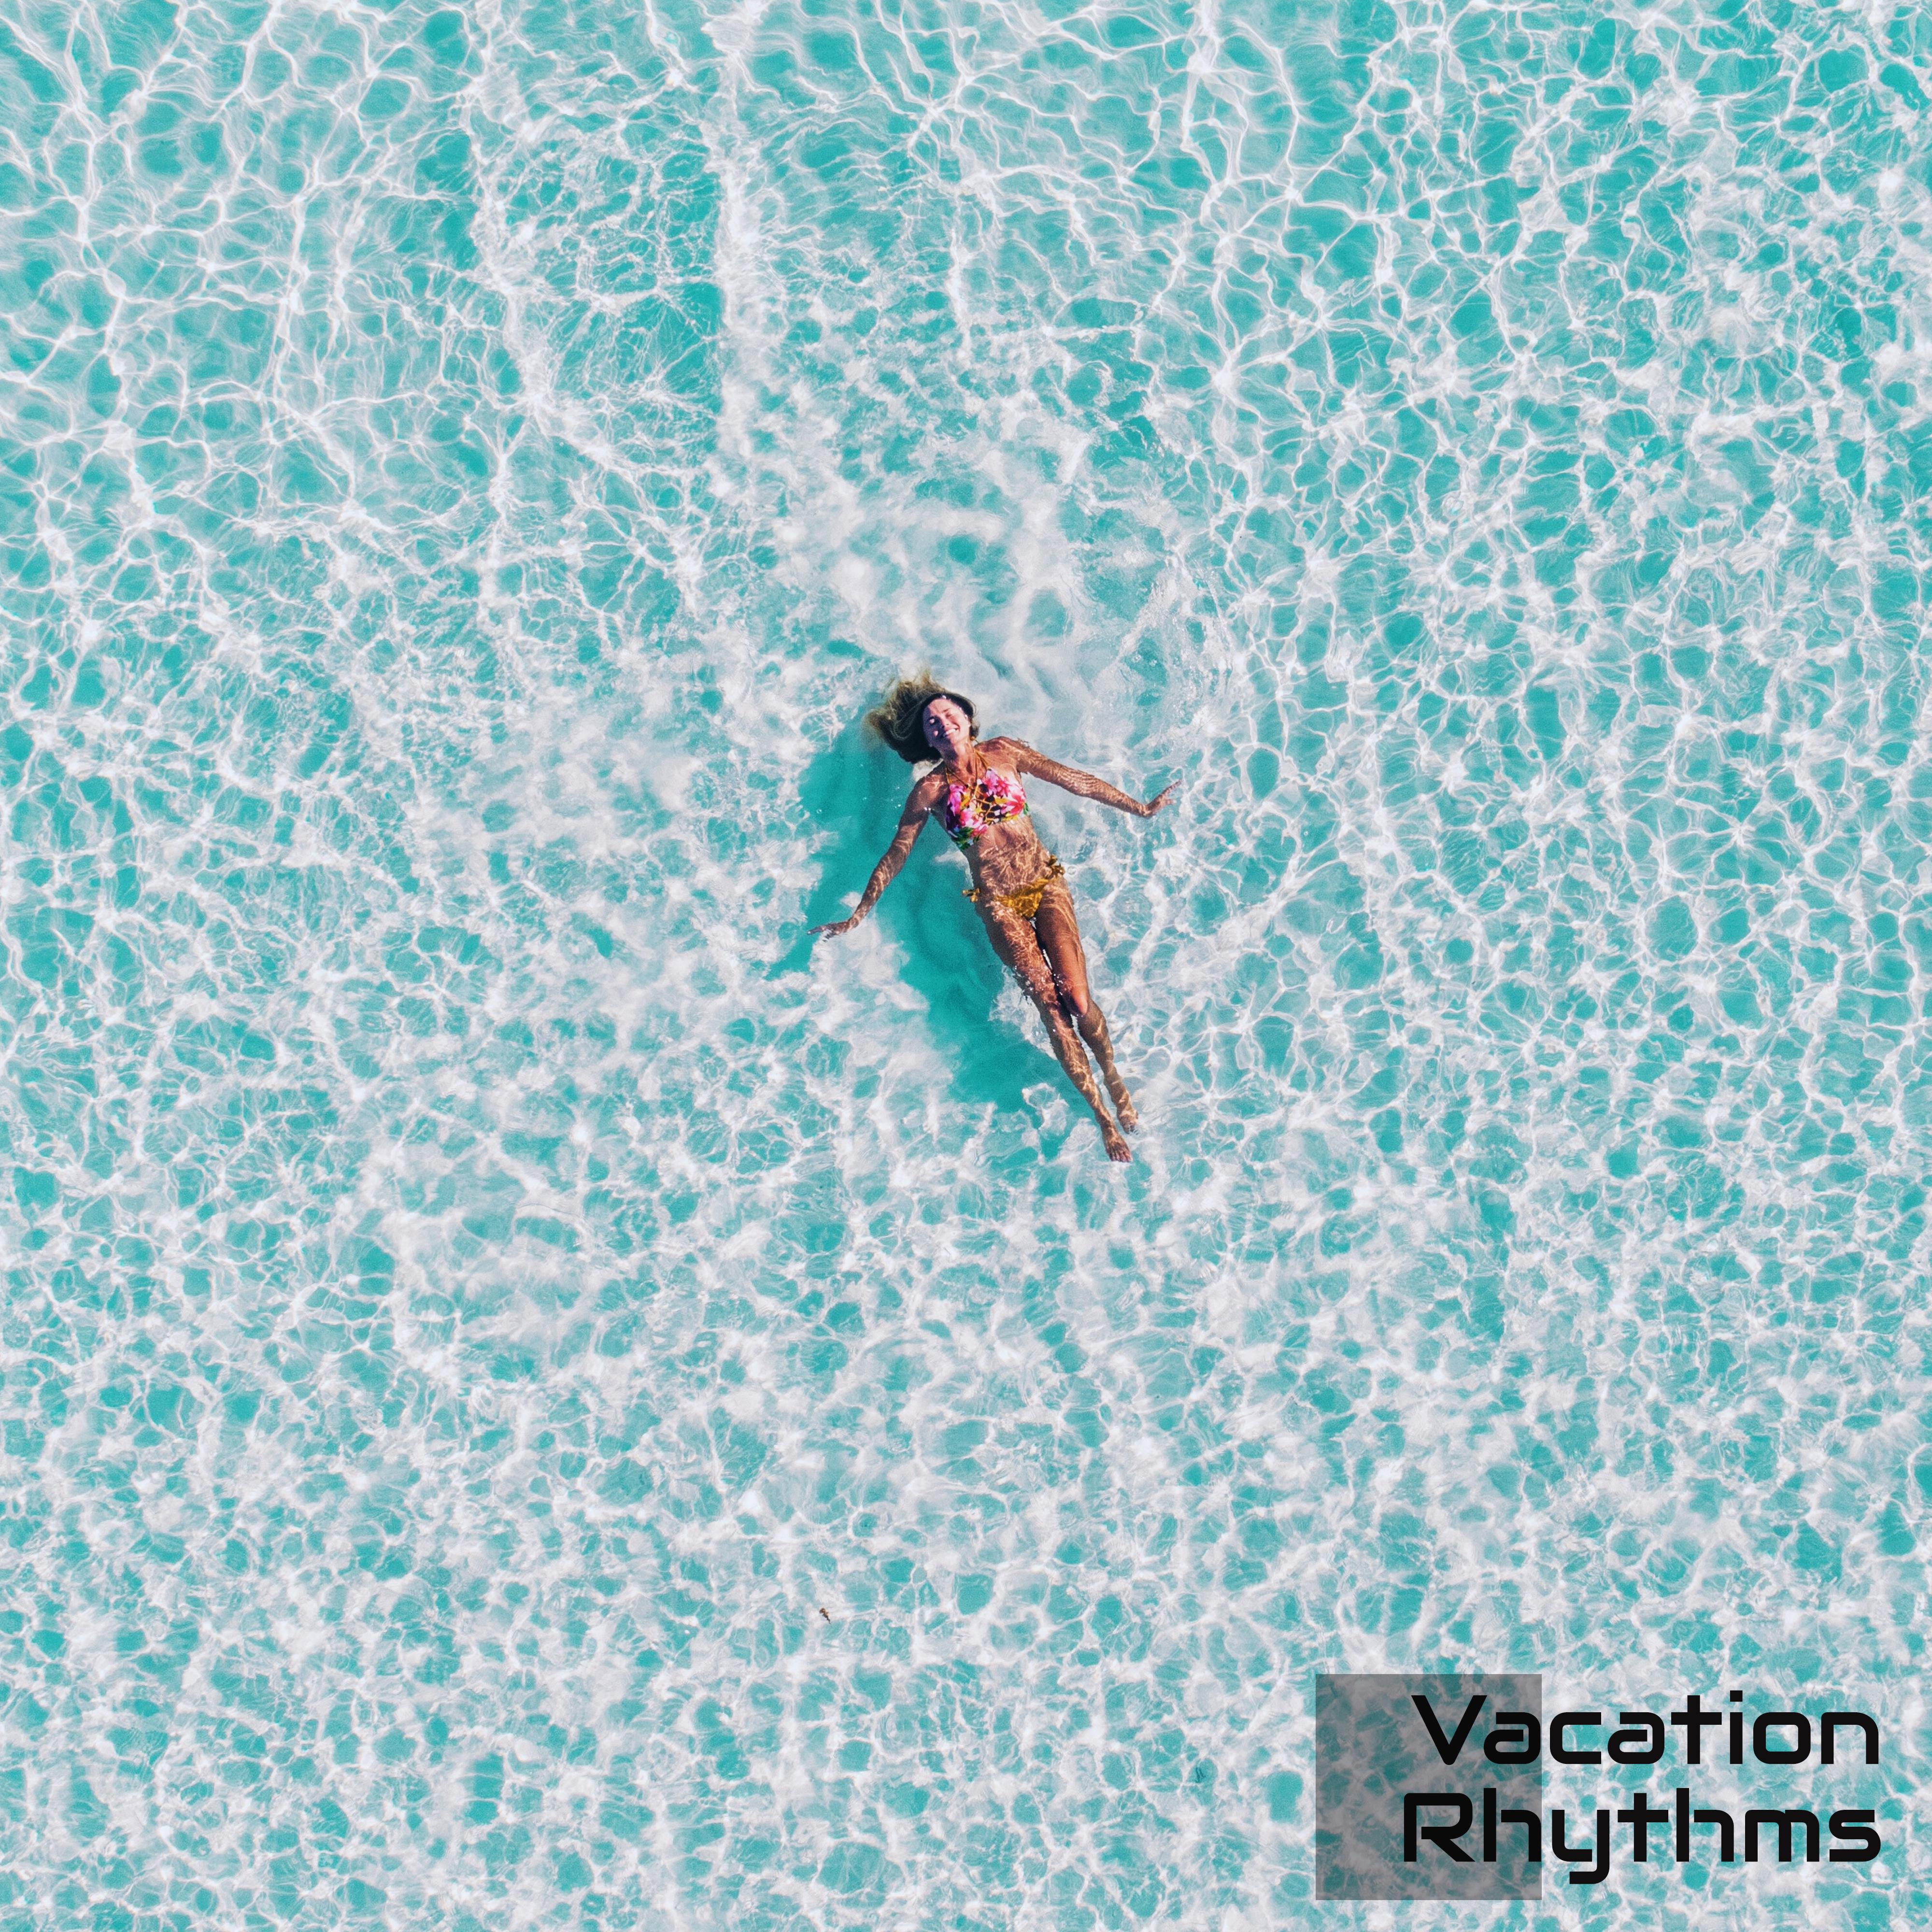 Vacation Rhythms - Holiday Vibes, Ibiza Chill Out, Summer Hits 2019, Tropical Chillout 2019, Relax